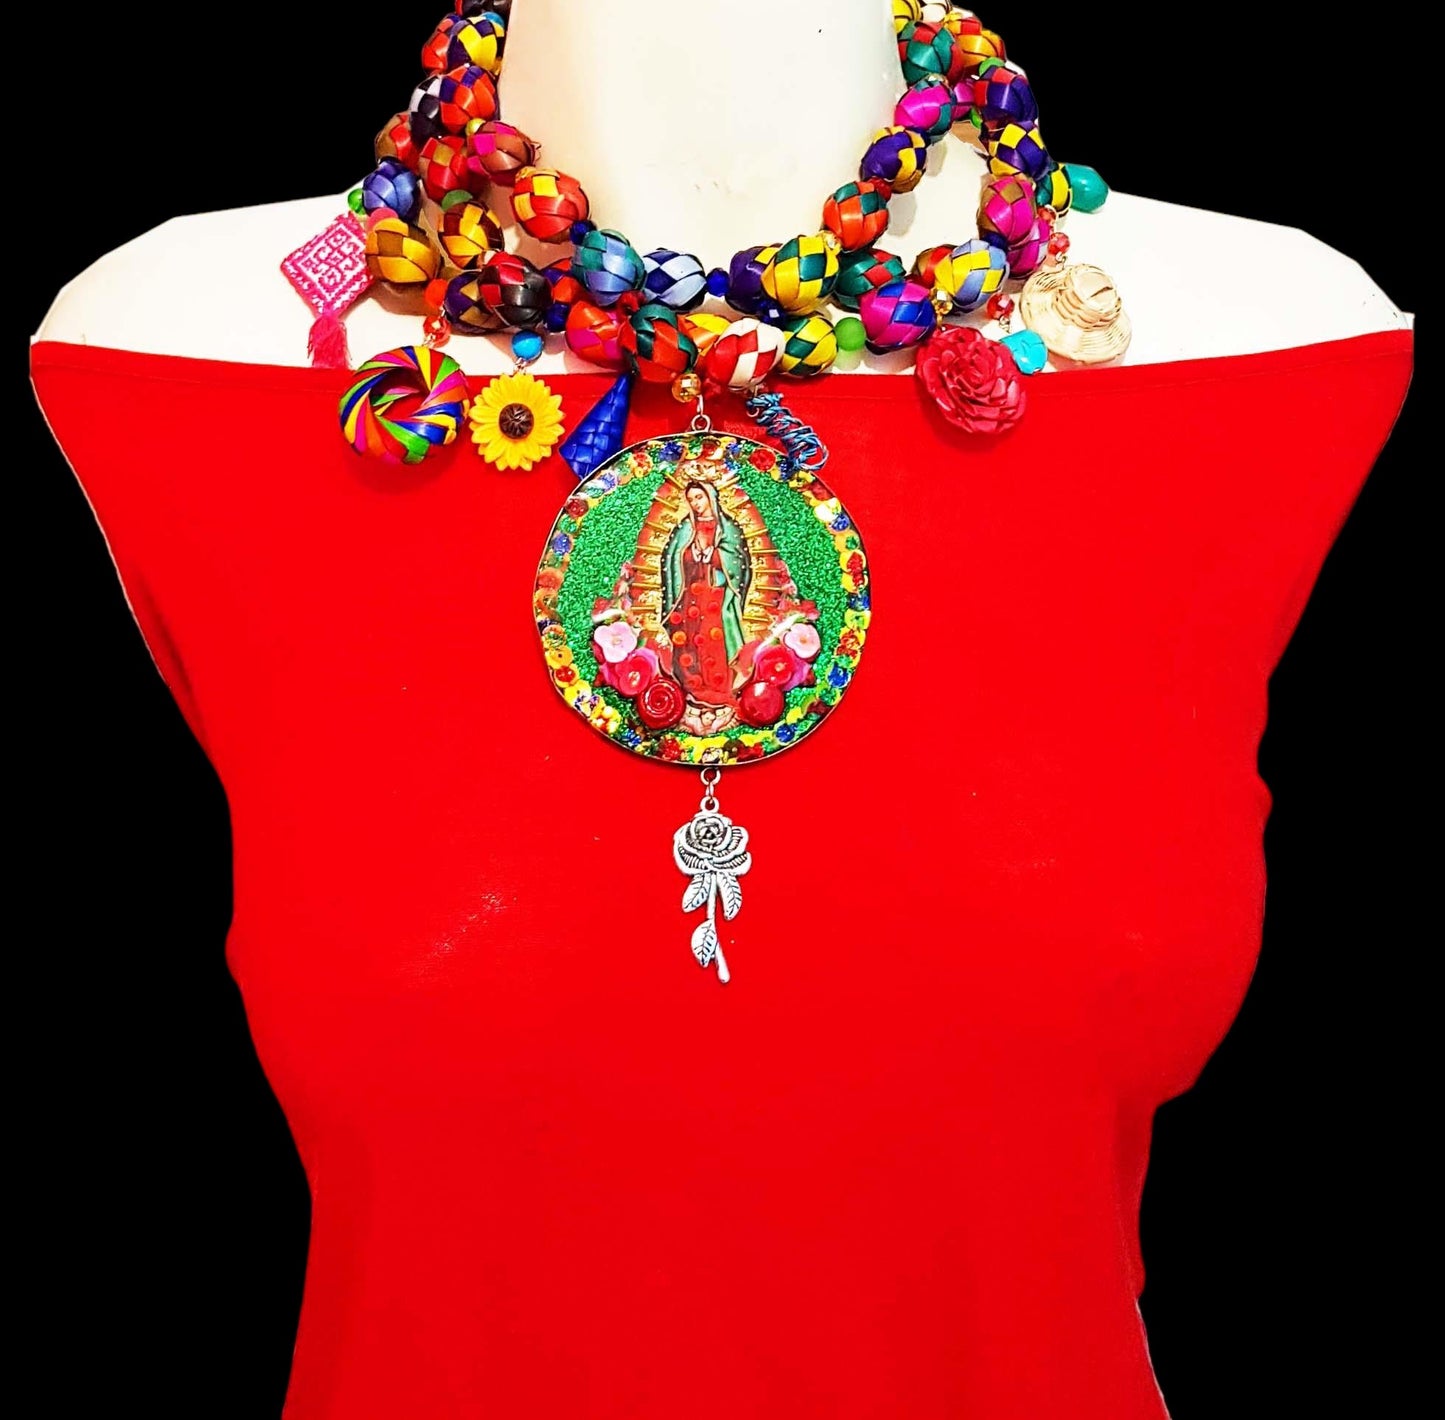 Medallones Choker necklaces with the Virgin of Guadalupe in the center with green background and red roses. The chain is designed by hand with paper mache of different colors with circular shape and hanging elements such as roses, hats. 